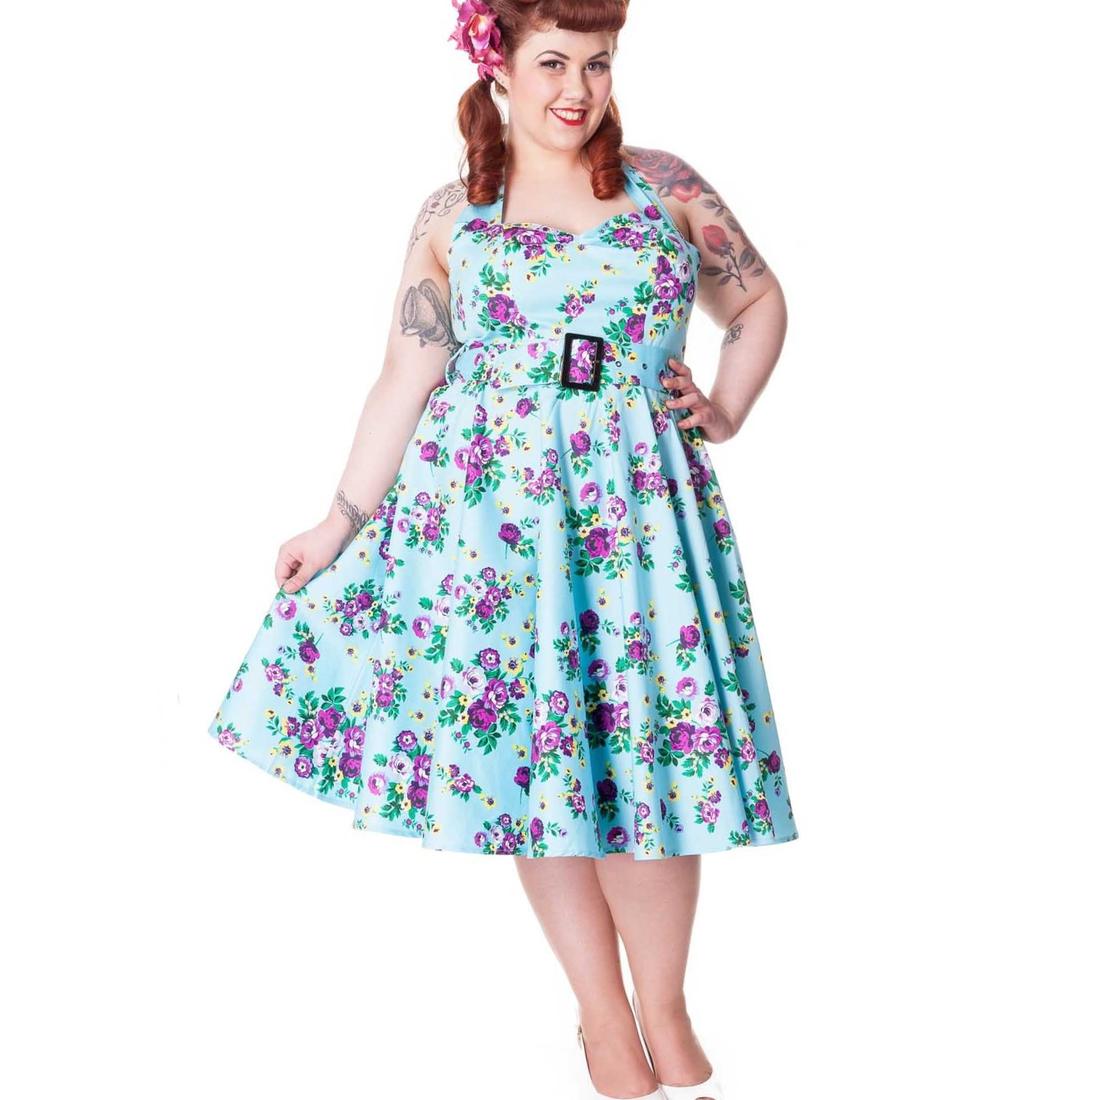 Hell bunny plus size dresses - PlusLook.eu Collection